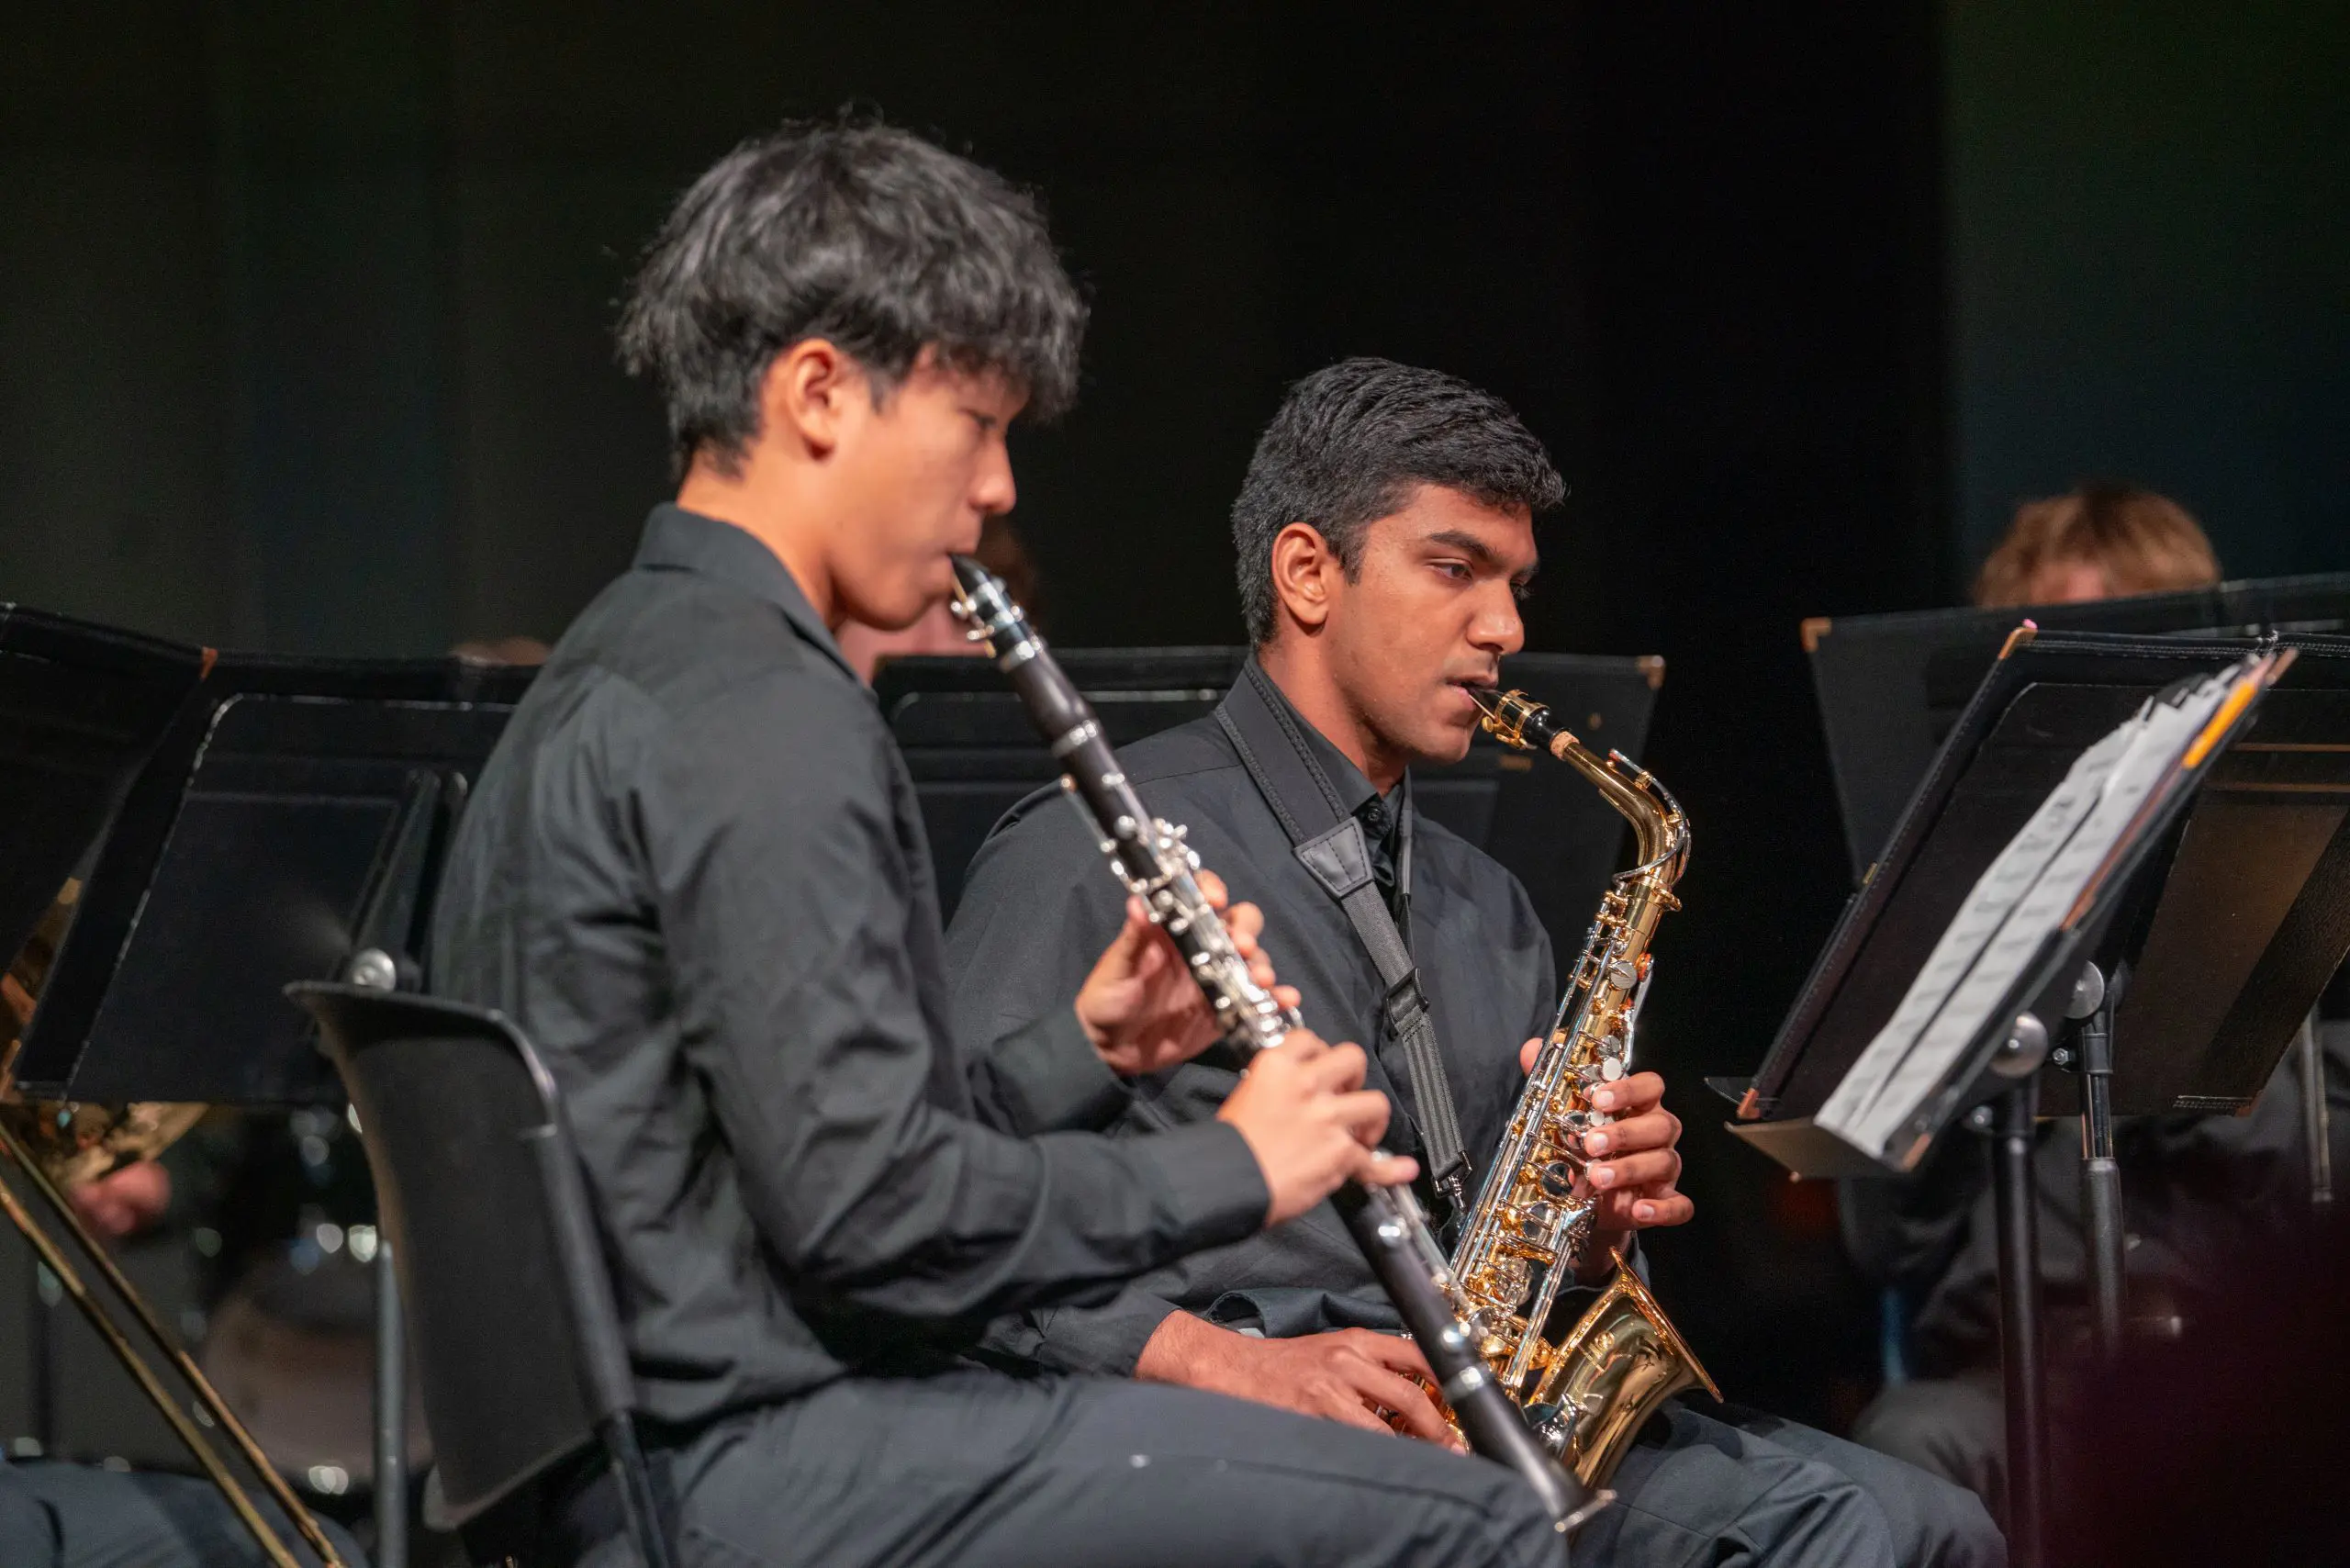 Students playing instruments onstage